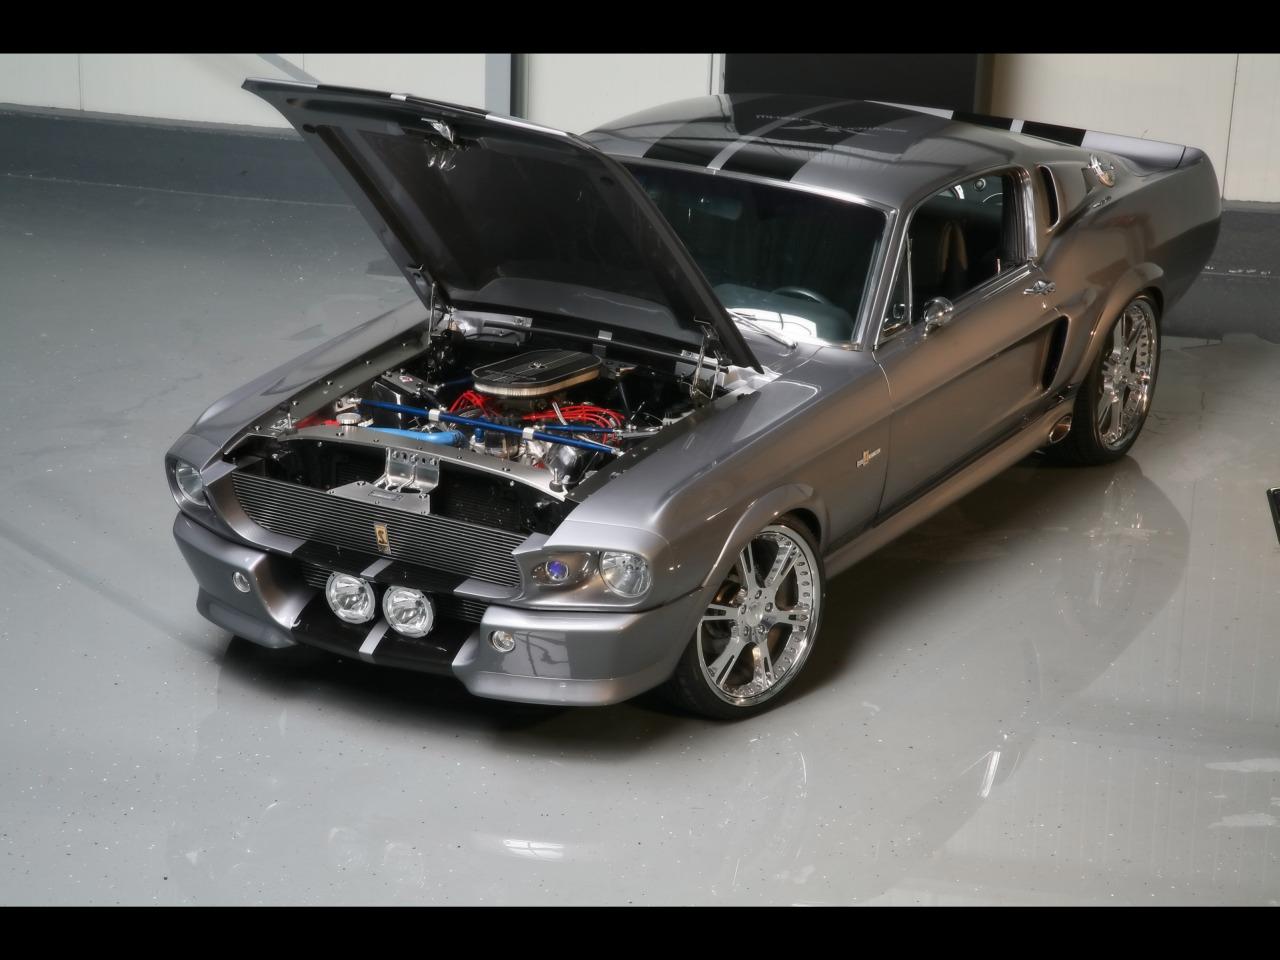 Ford Shelby GT 500 Convertible